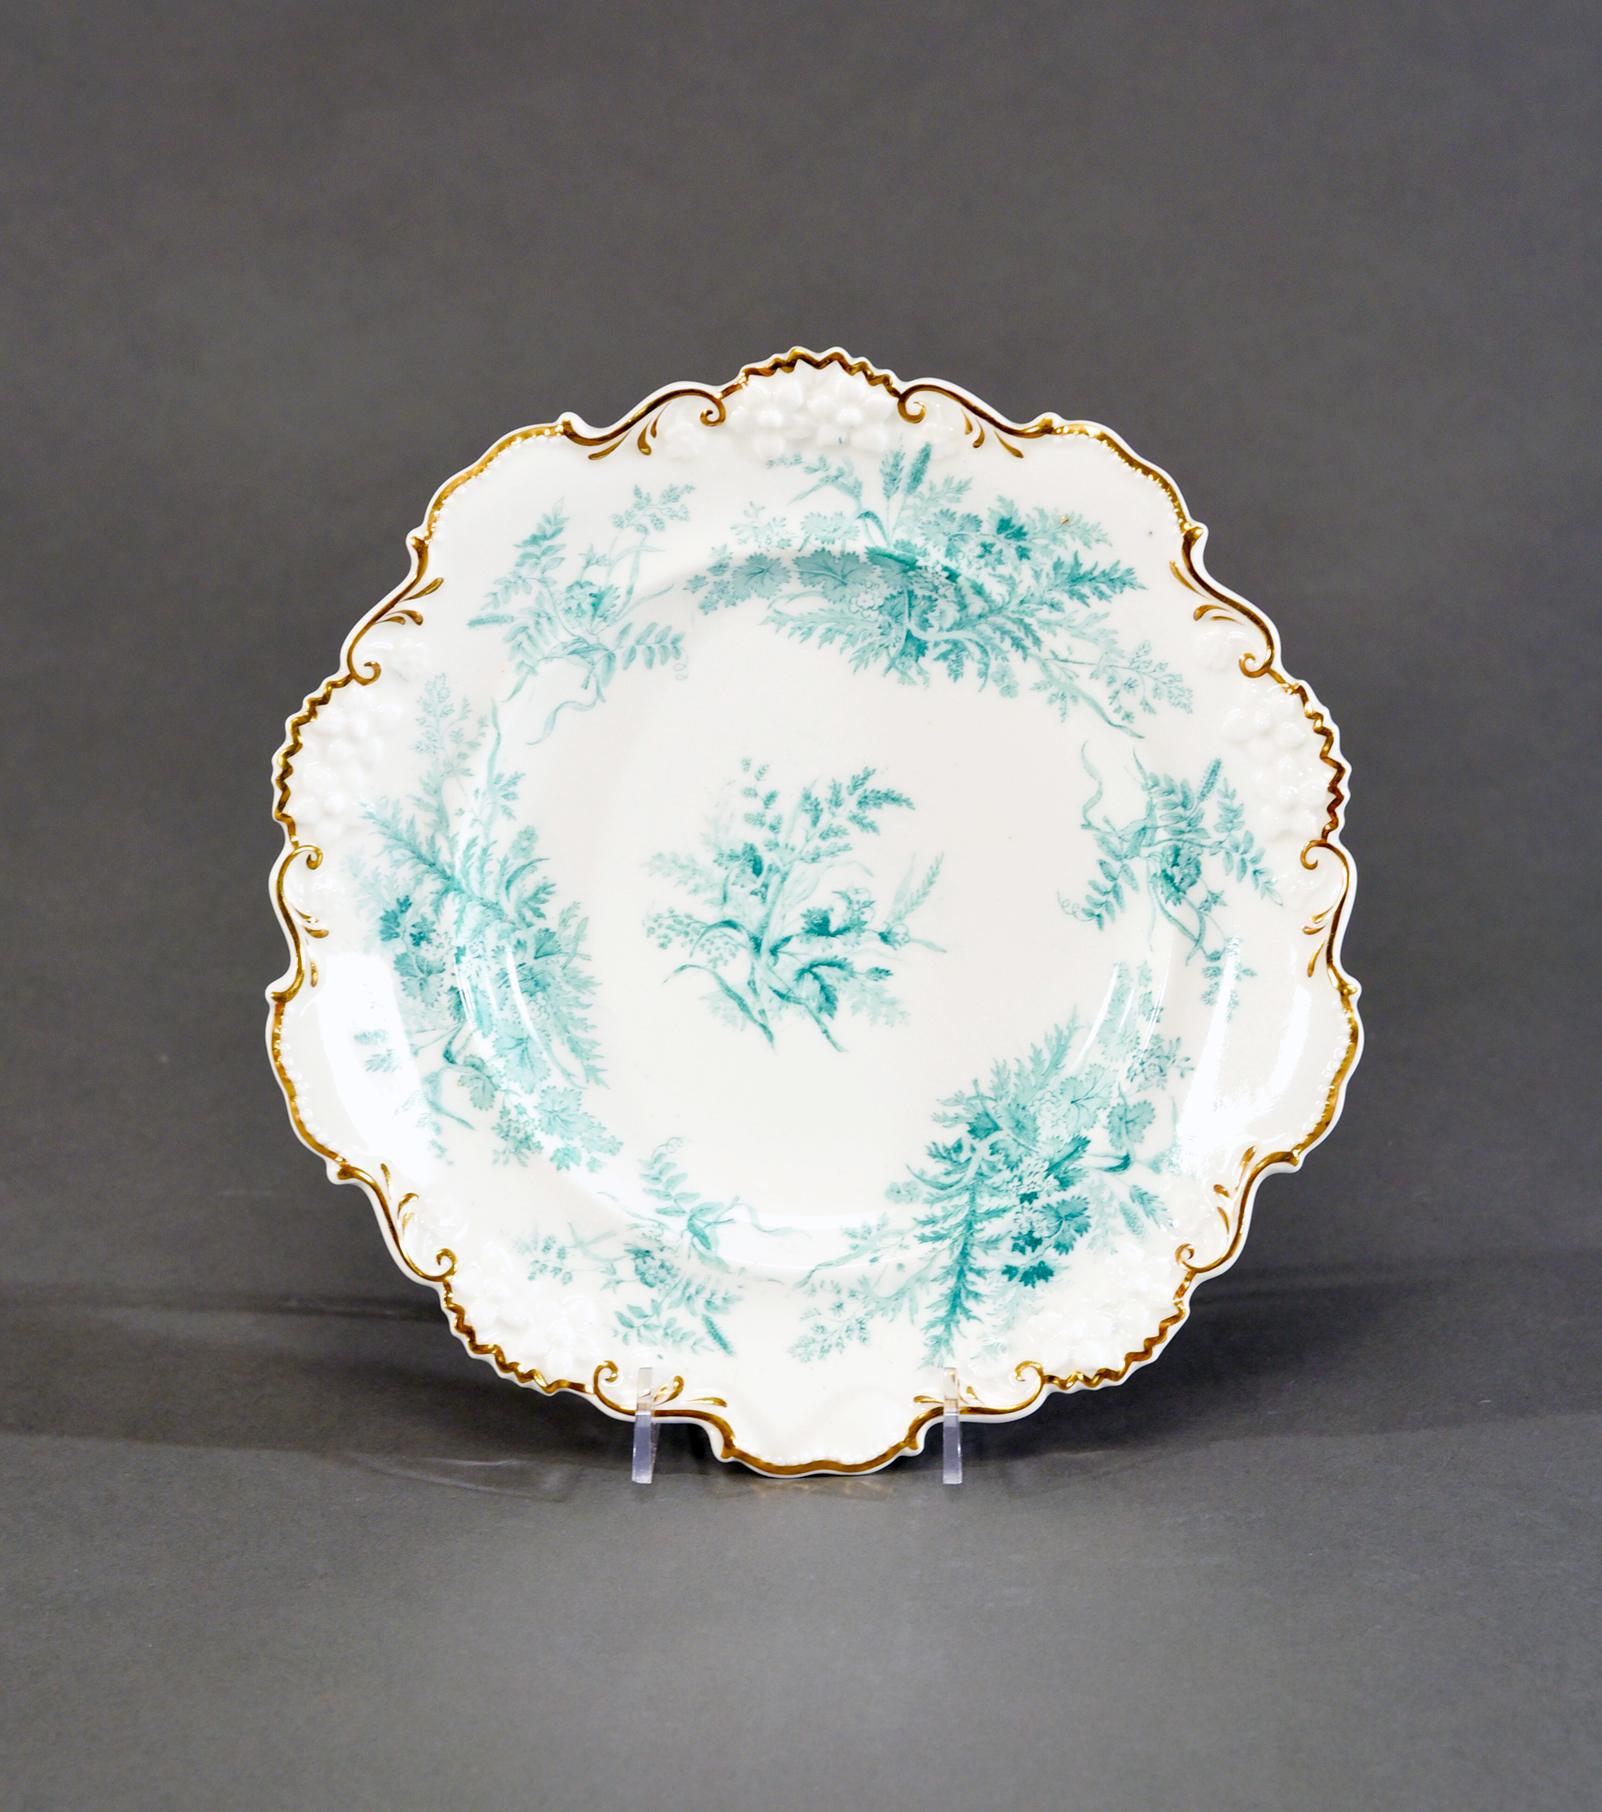 This set of 13 Aesthetic Movement dessert plates with matching serving compote, were made by Davenport ca. 1890's and feature hand decorated ferns surrounding the molded floral relief borders and highlighted with fern leaves. The soft blue-green